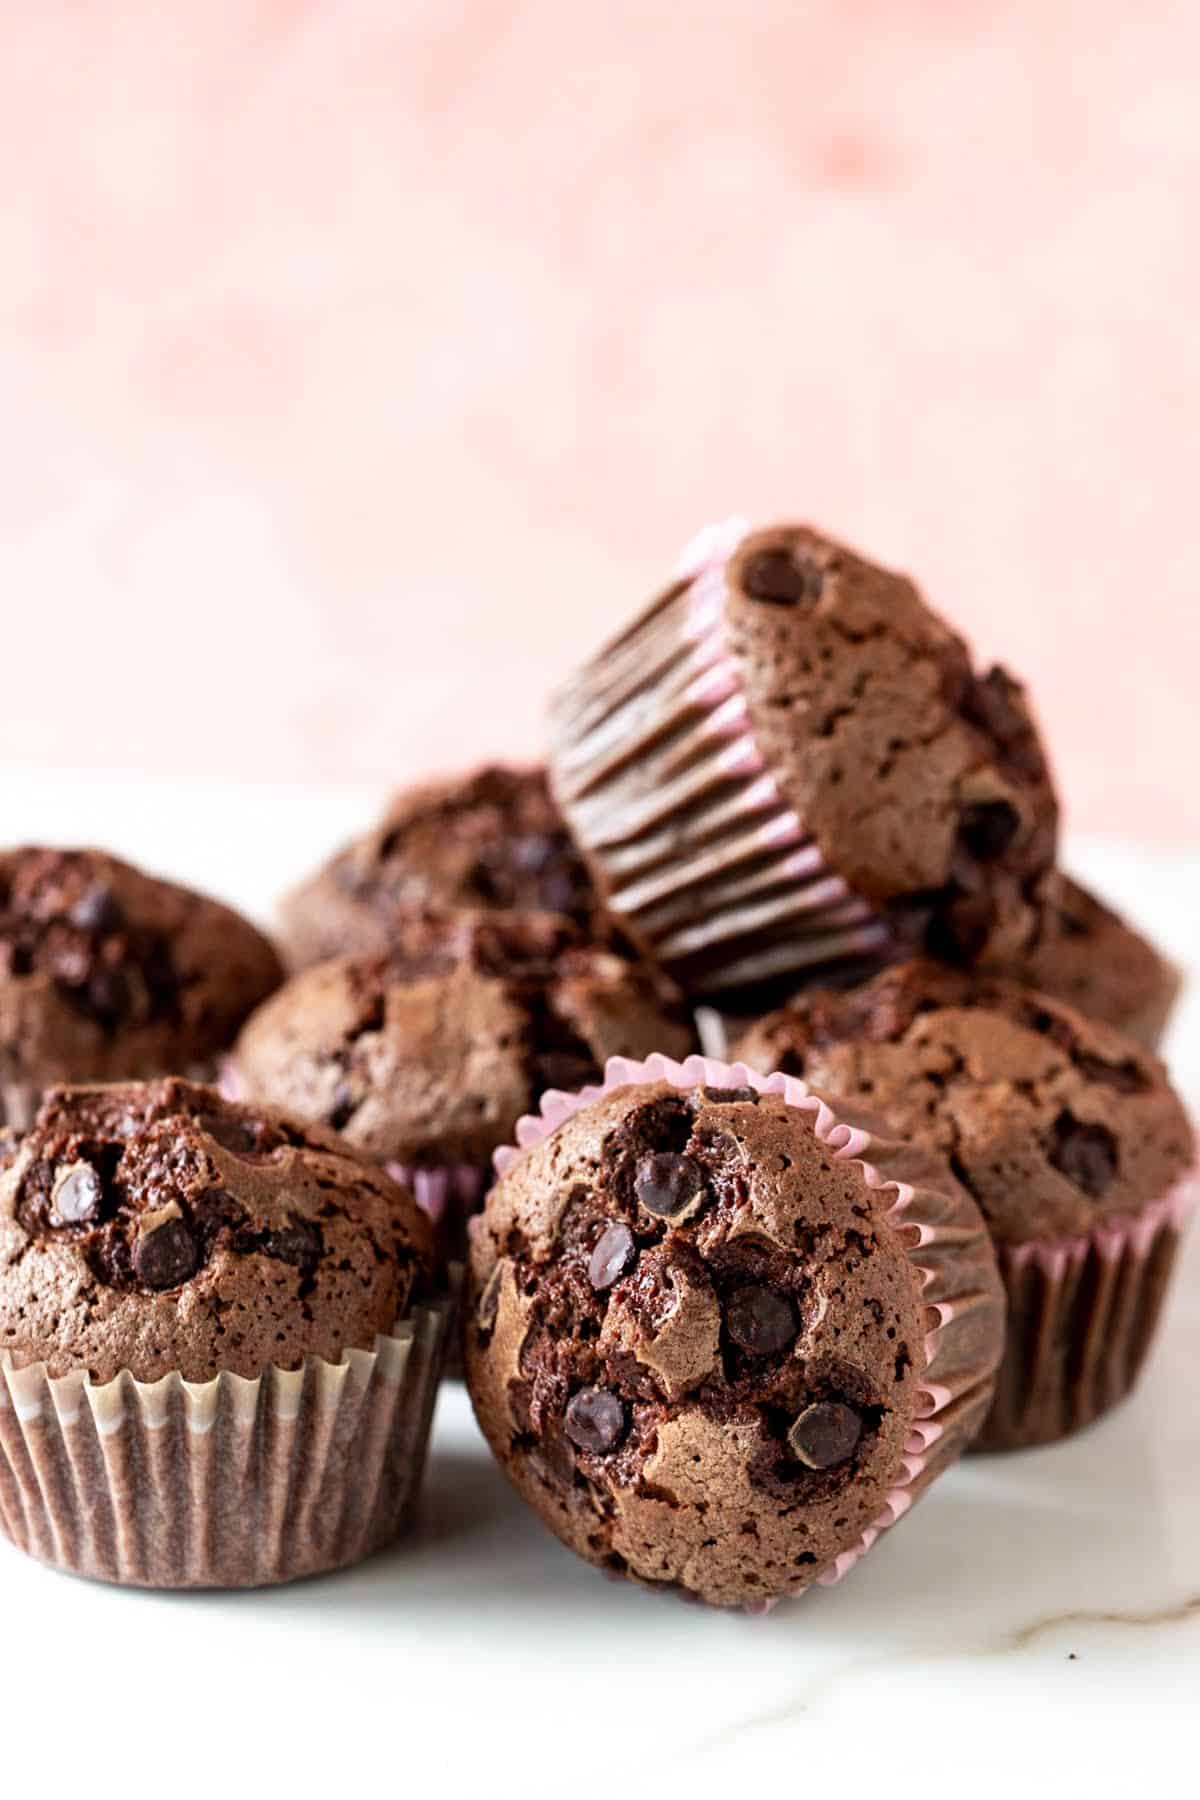 Several whole chocolate muffins in paper liners with white and pink background